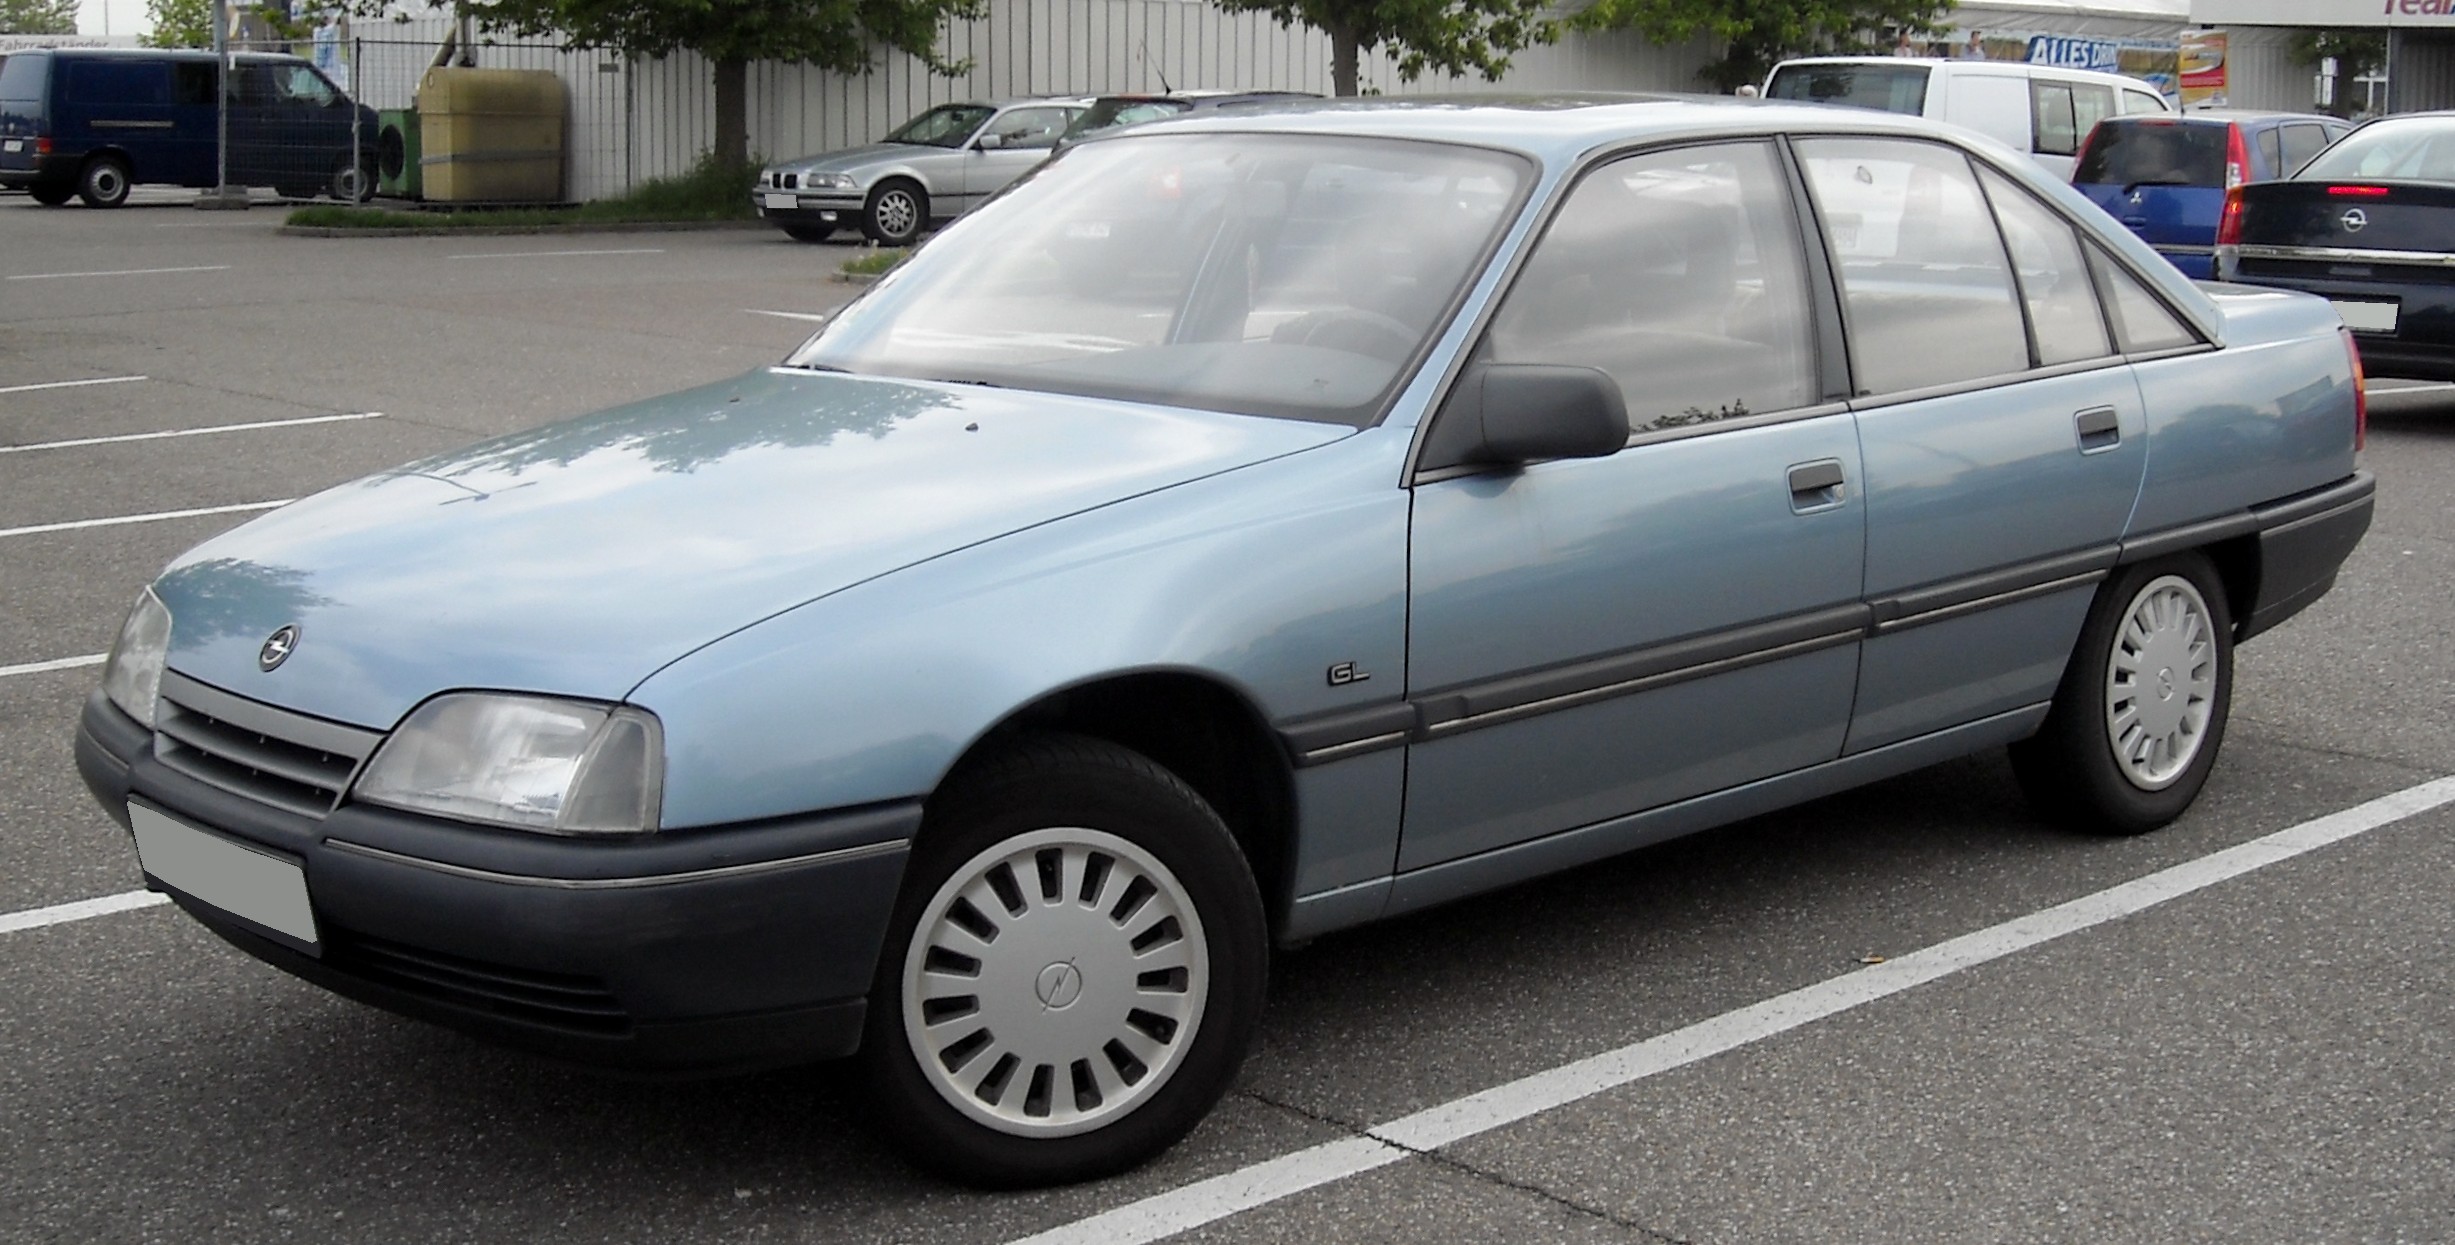 File:Opel Omega A front 20090430.jpg